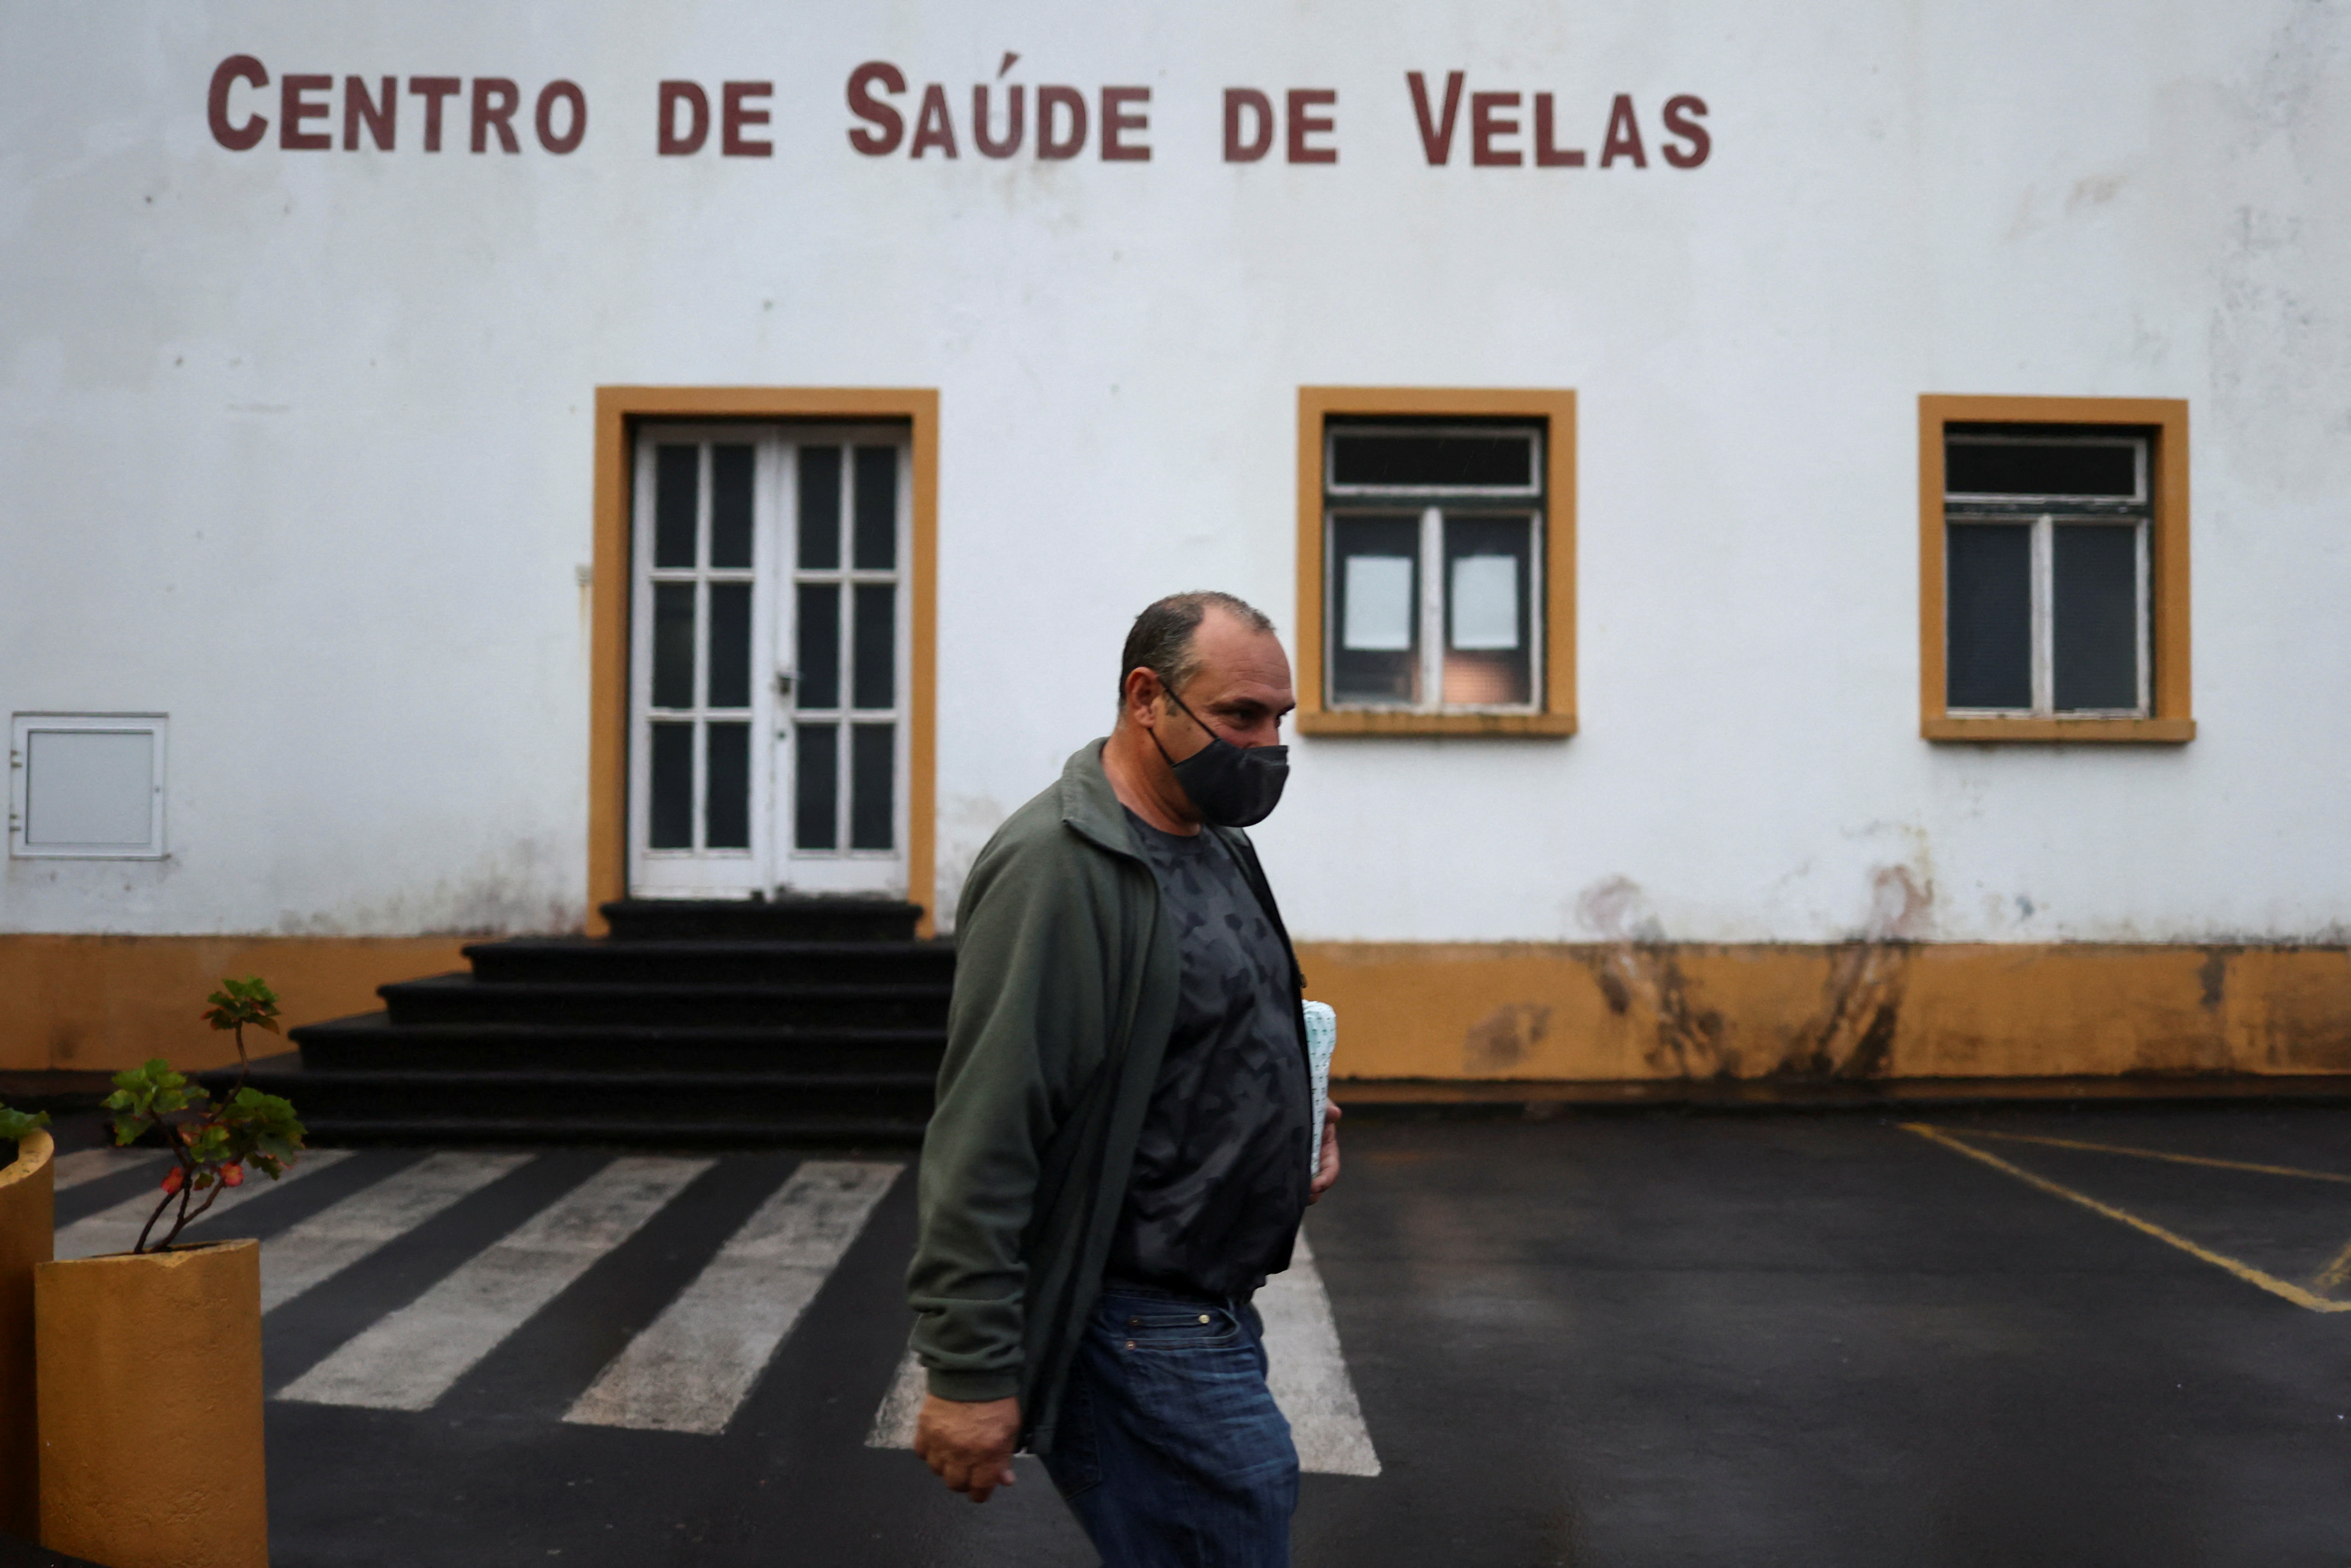 Azores volcanic island hit by thousands of quakes, in Velas